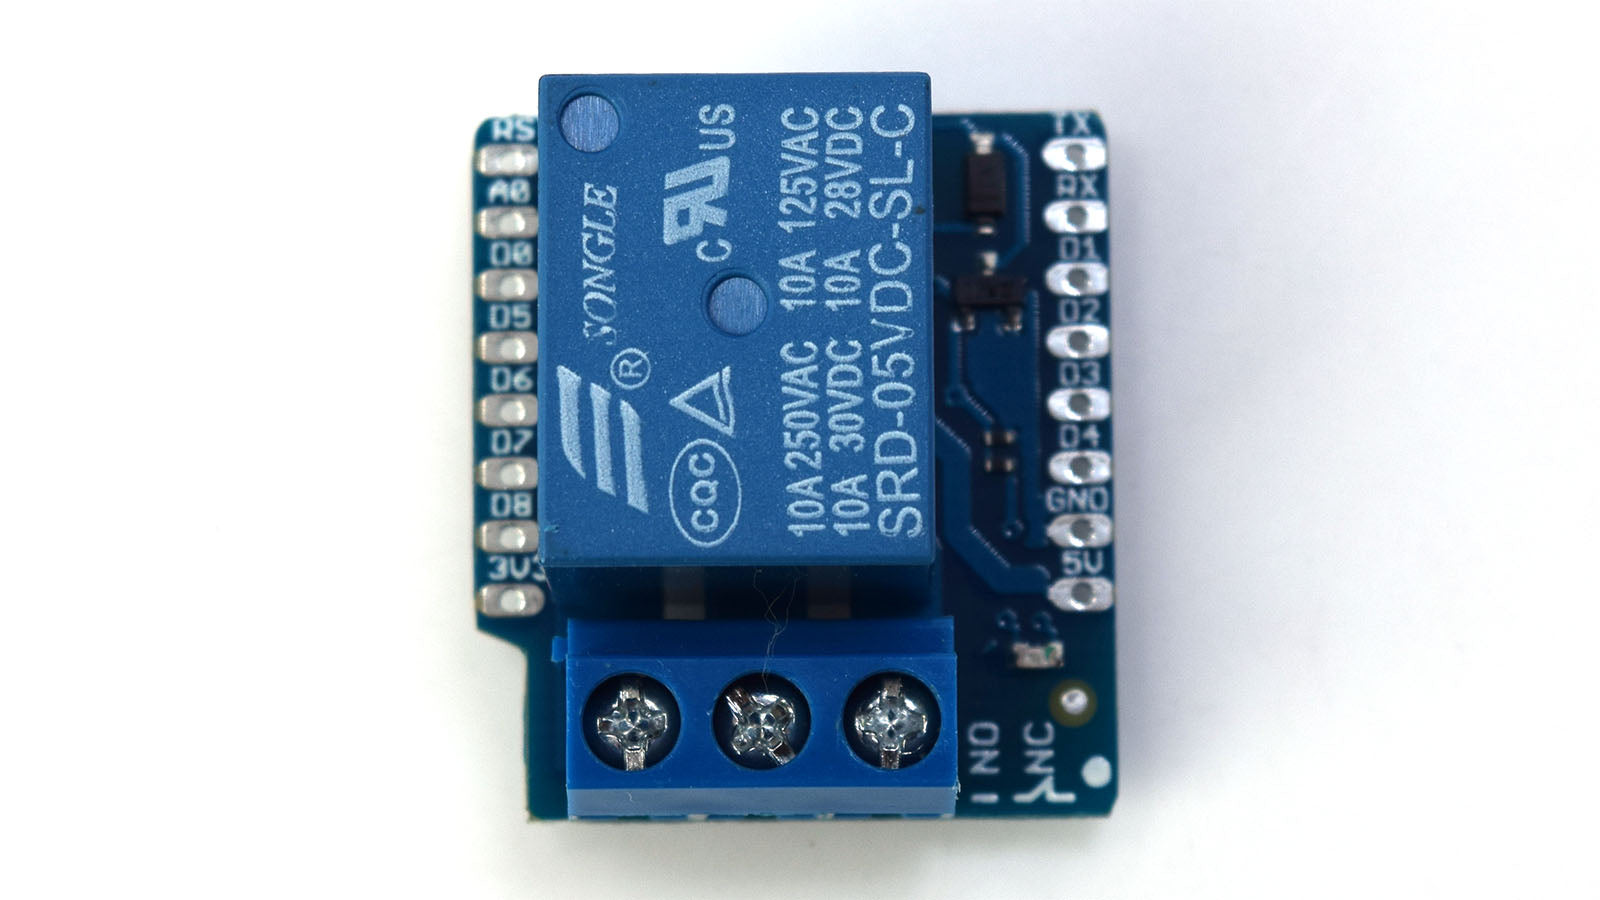 Relay Shield for D1 Mini